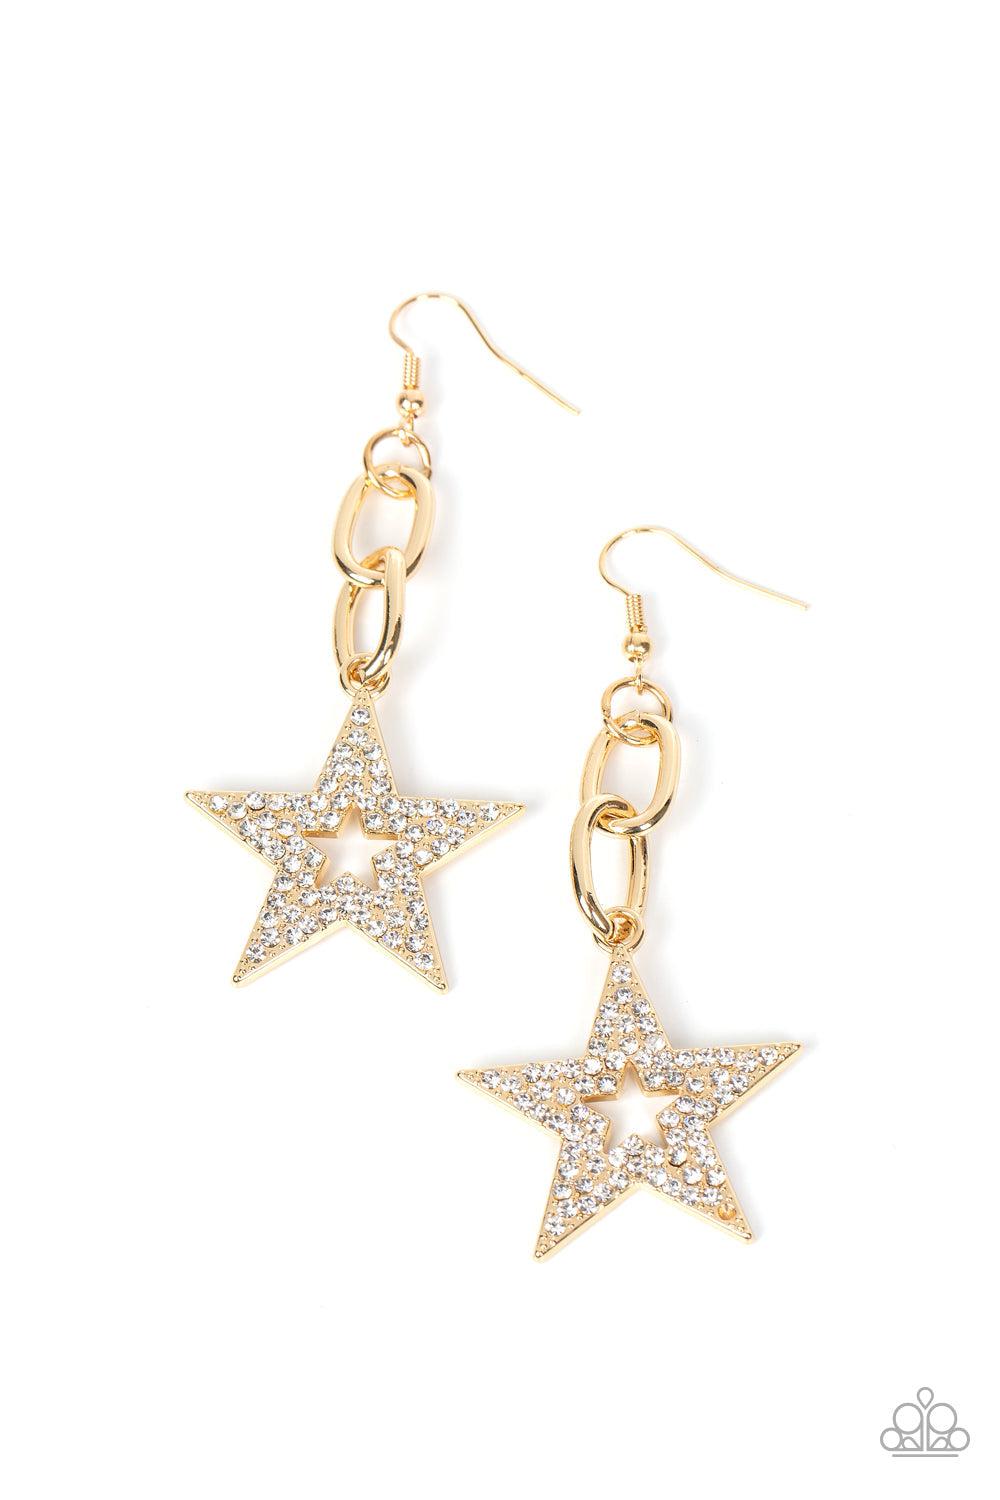 Cosmic Celebrity Gold &amp; White Rhinestone Star Earrings - Paparazzi Accessories- lightbox - CarasShop.com - $5 Jewelry by Cara Jewels